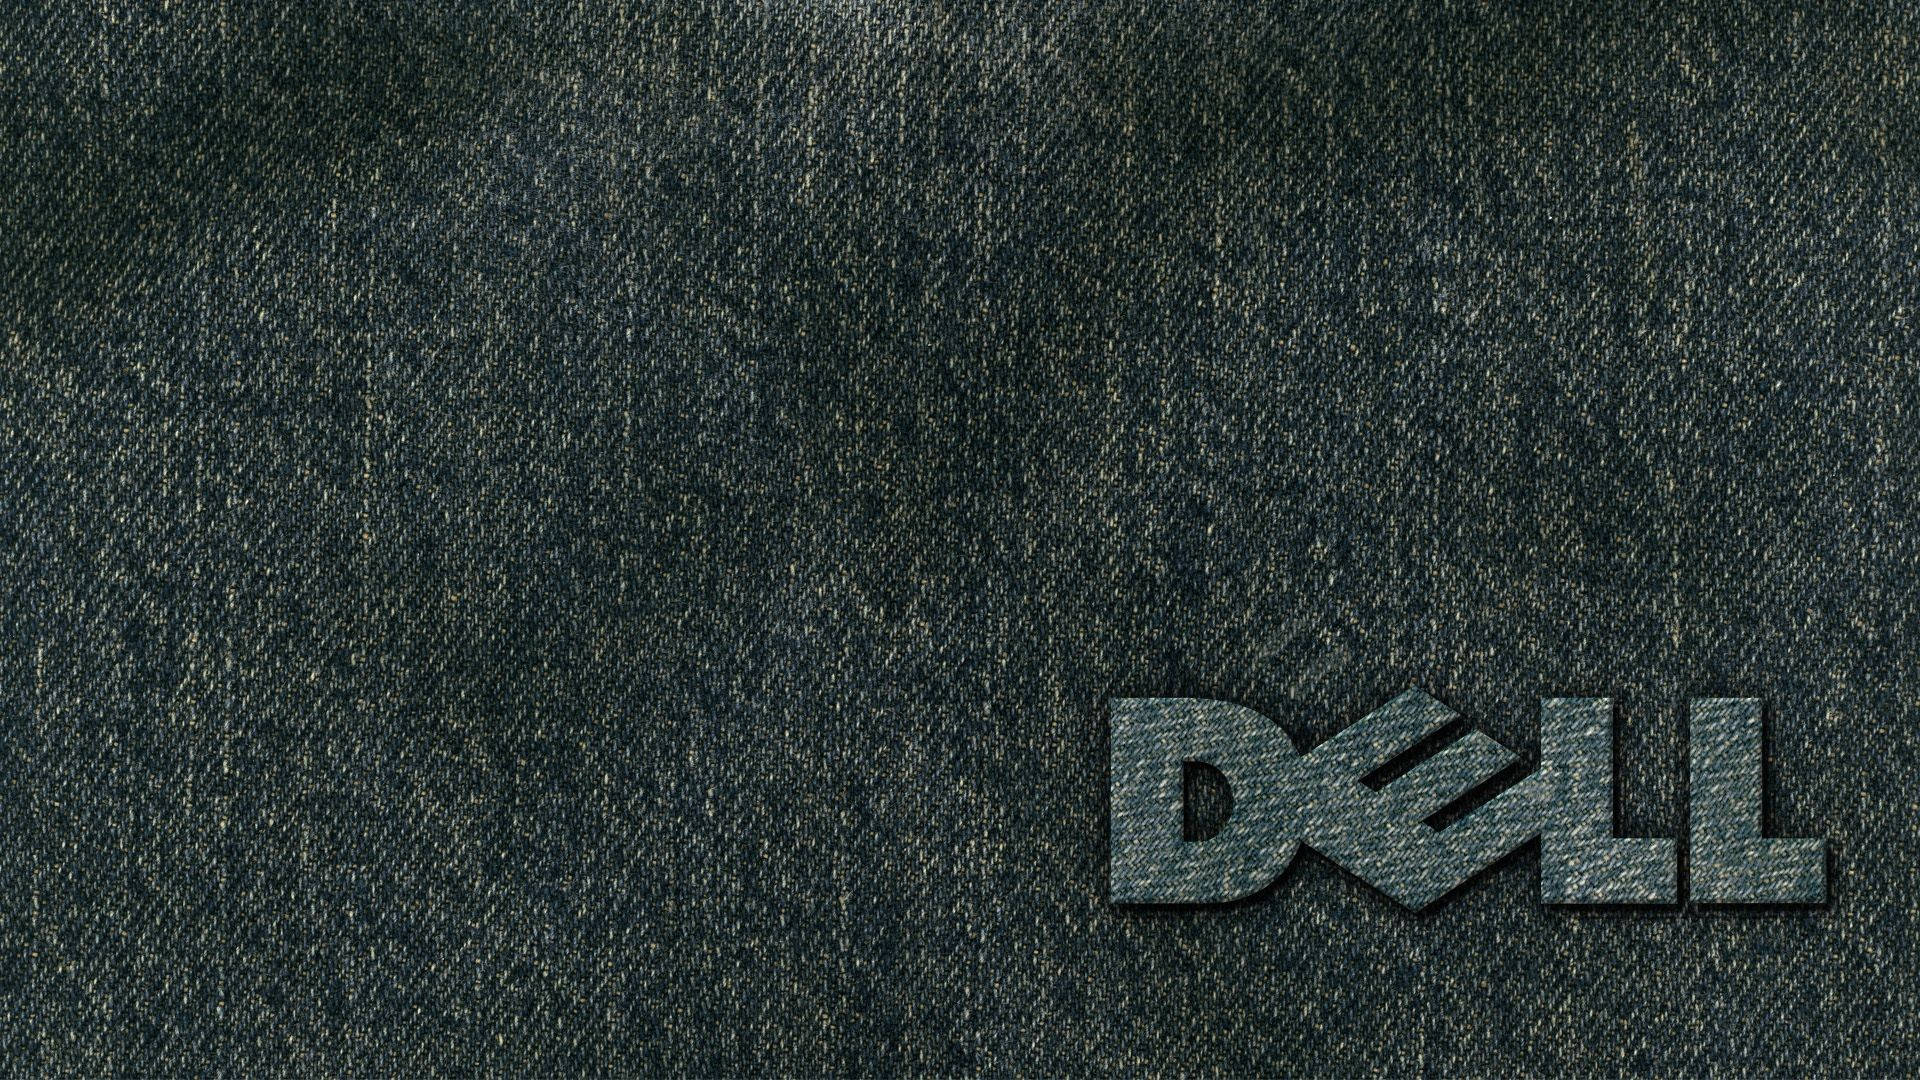 Dell 1920X1080 Wallpaper and Background Image